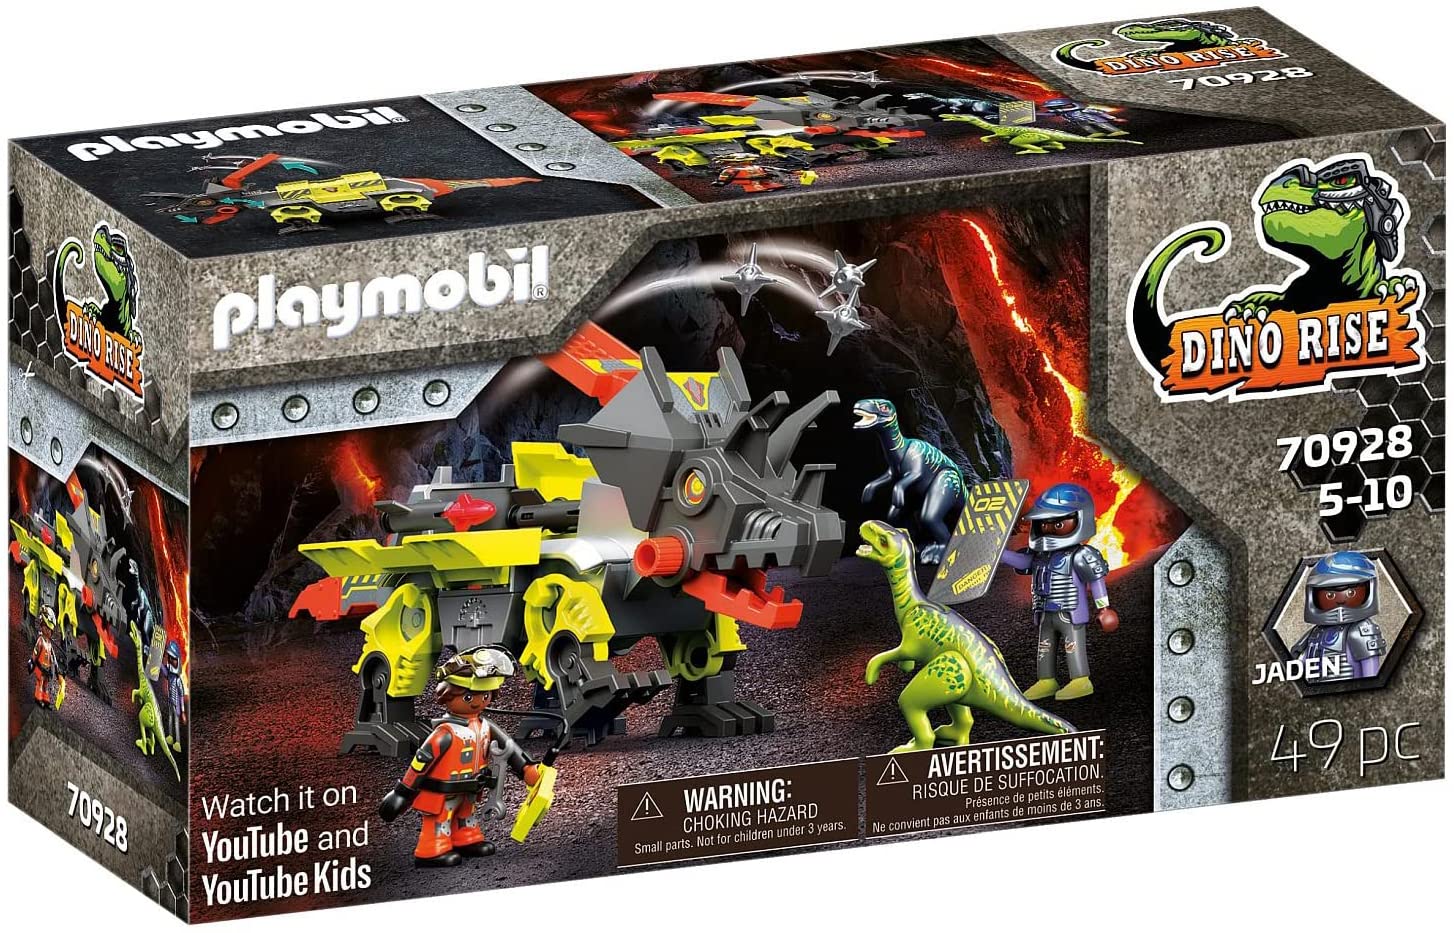 PLAYMOBIL Dino Rise 70928 Robo-Dino Battle Machine, Cannons and Catapult, Toy for Children from 5 Years